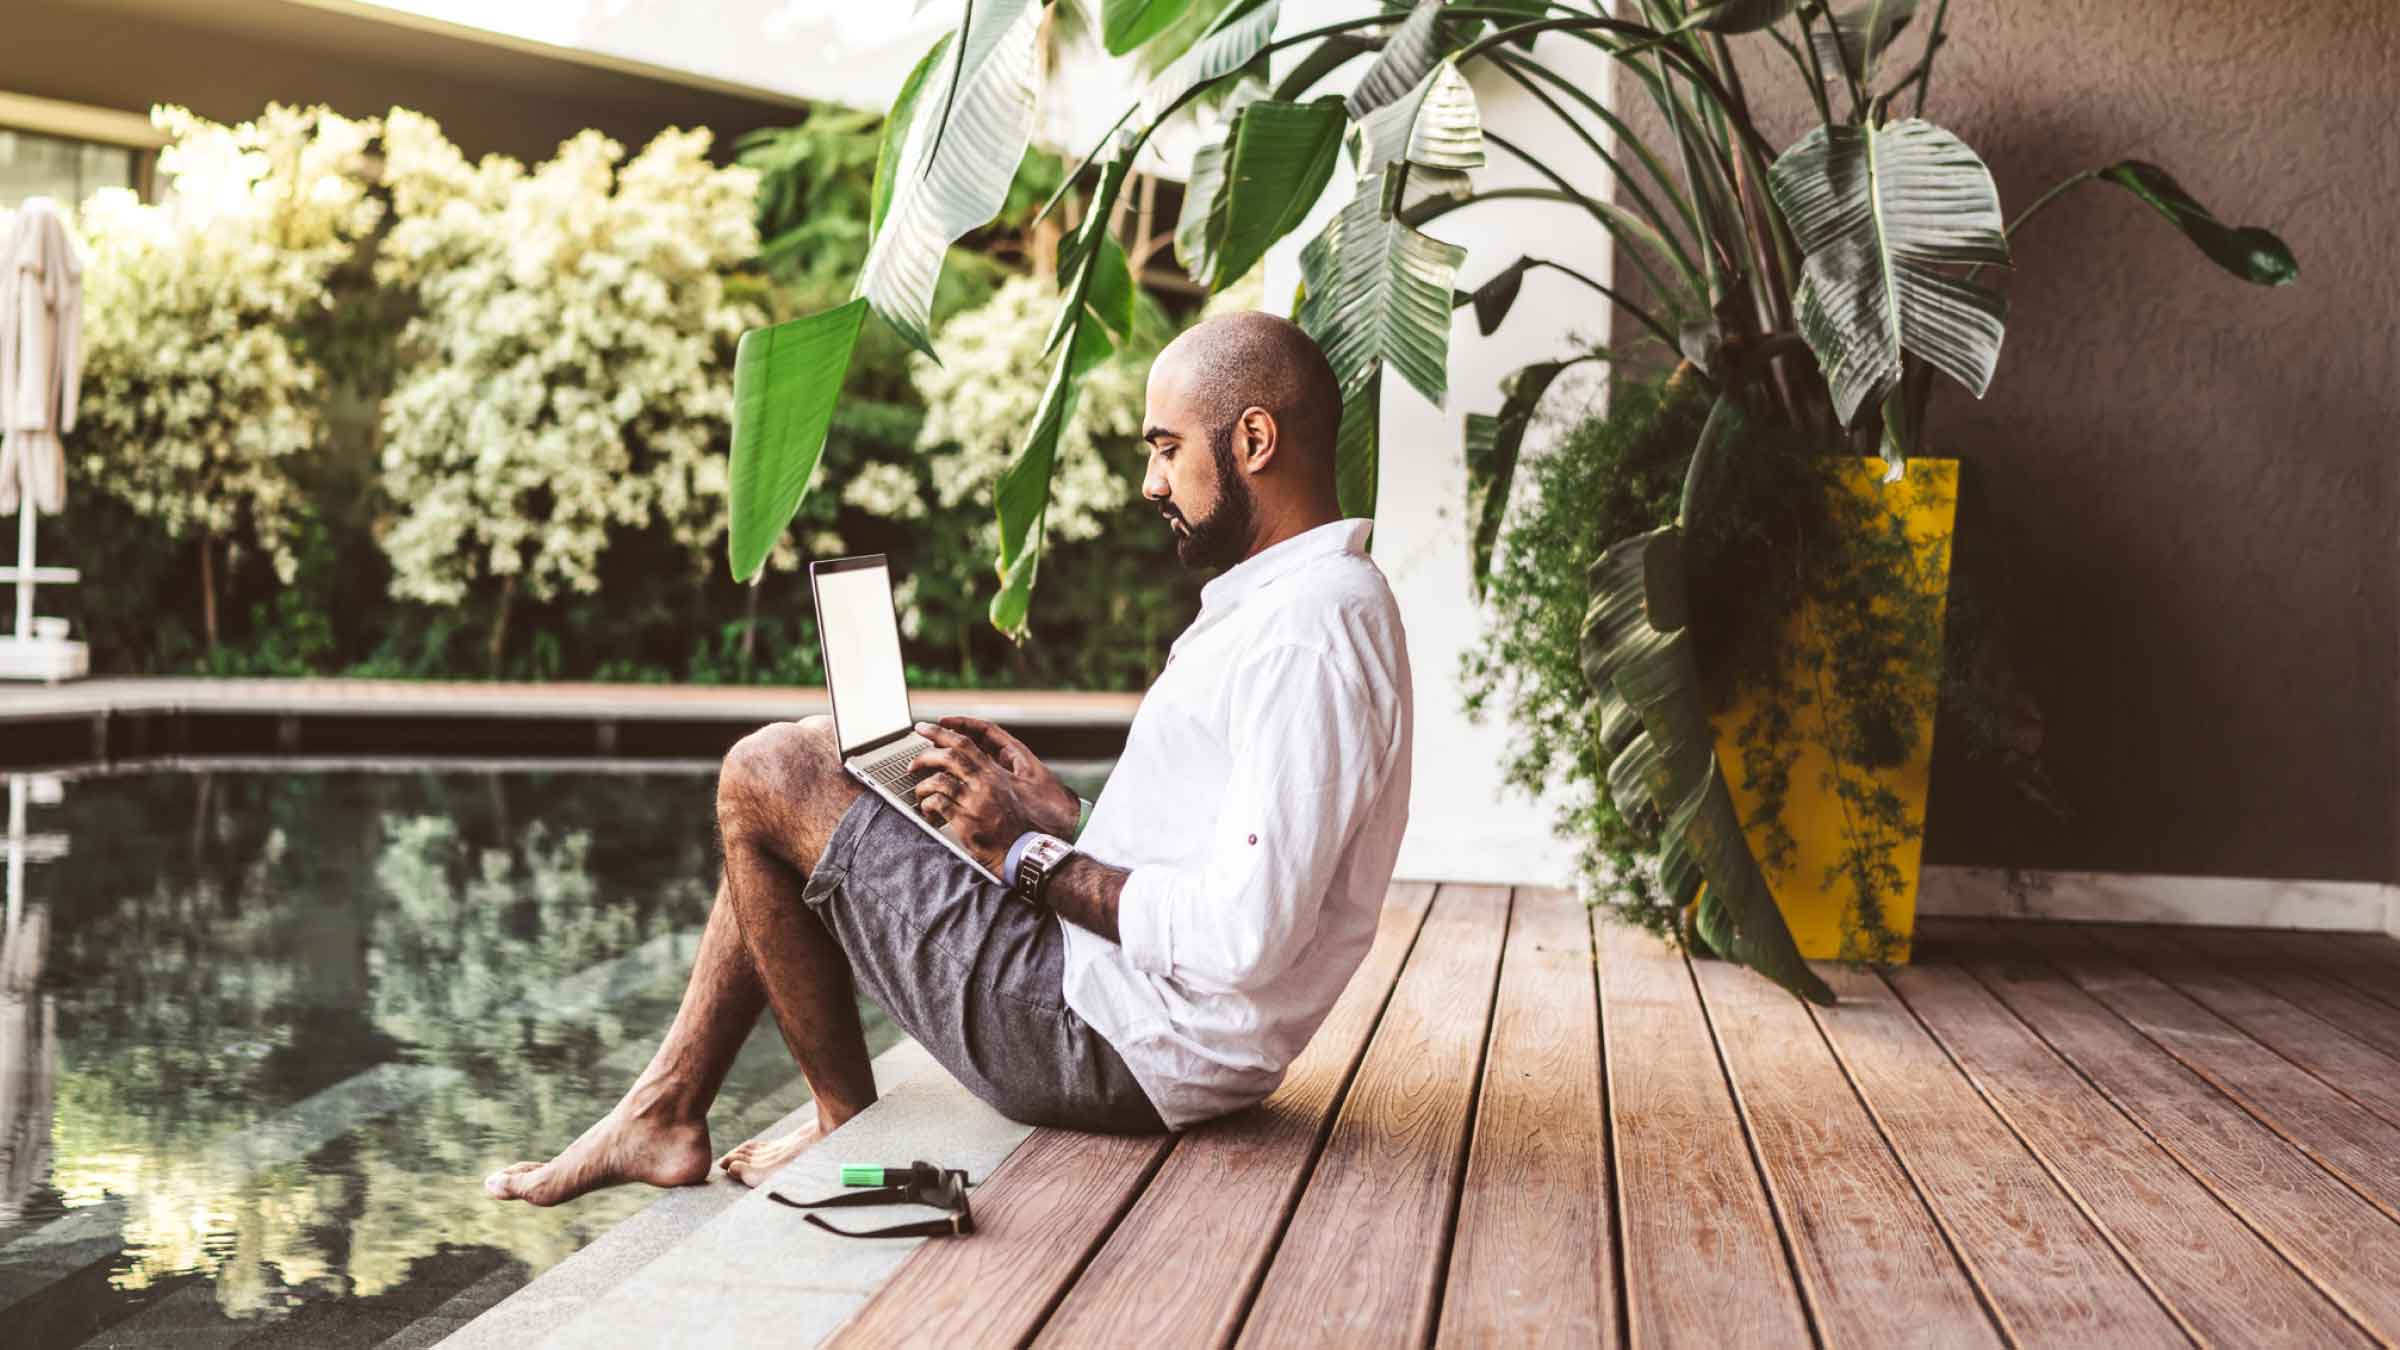 Man sits on the edge of a pool surrounded by wooden decking, palm leaves dangle in the background. He's about to dip his toe in the water while he works on his laptop.